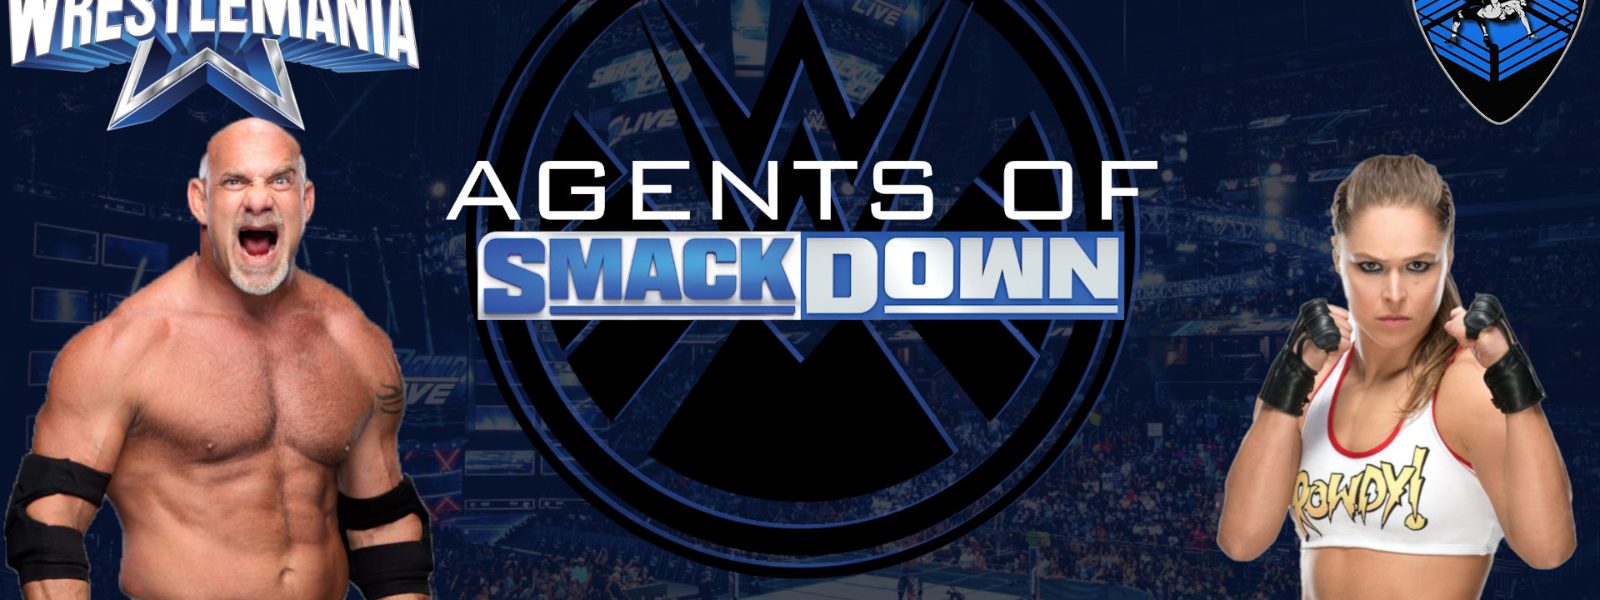 Roman, YOU'RE NEXT! - Agents Of Smackdown EP.40